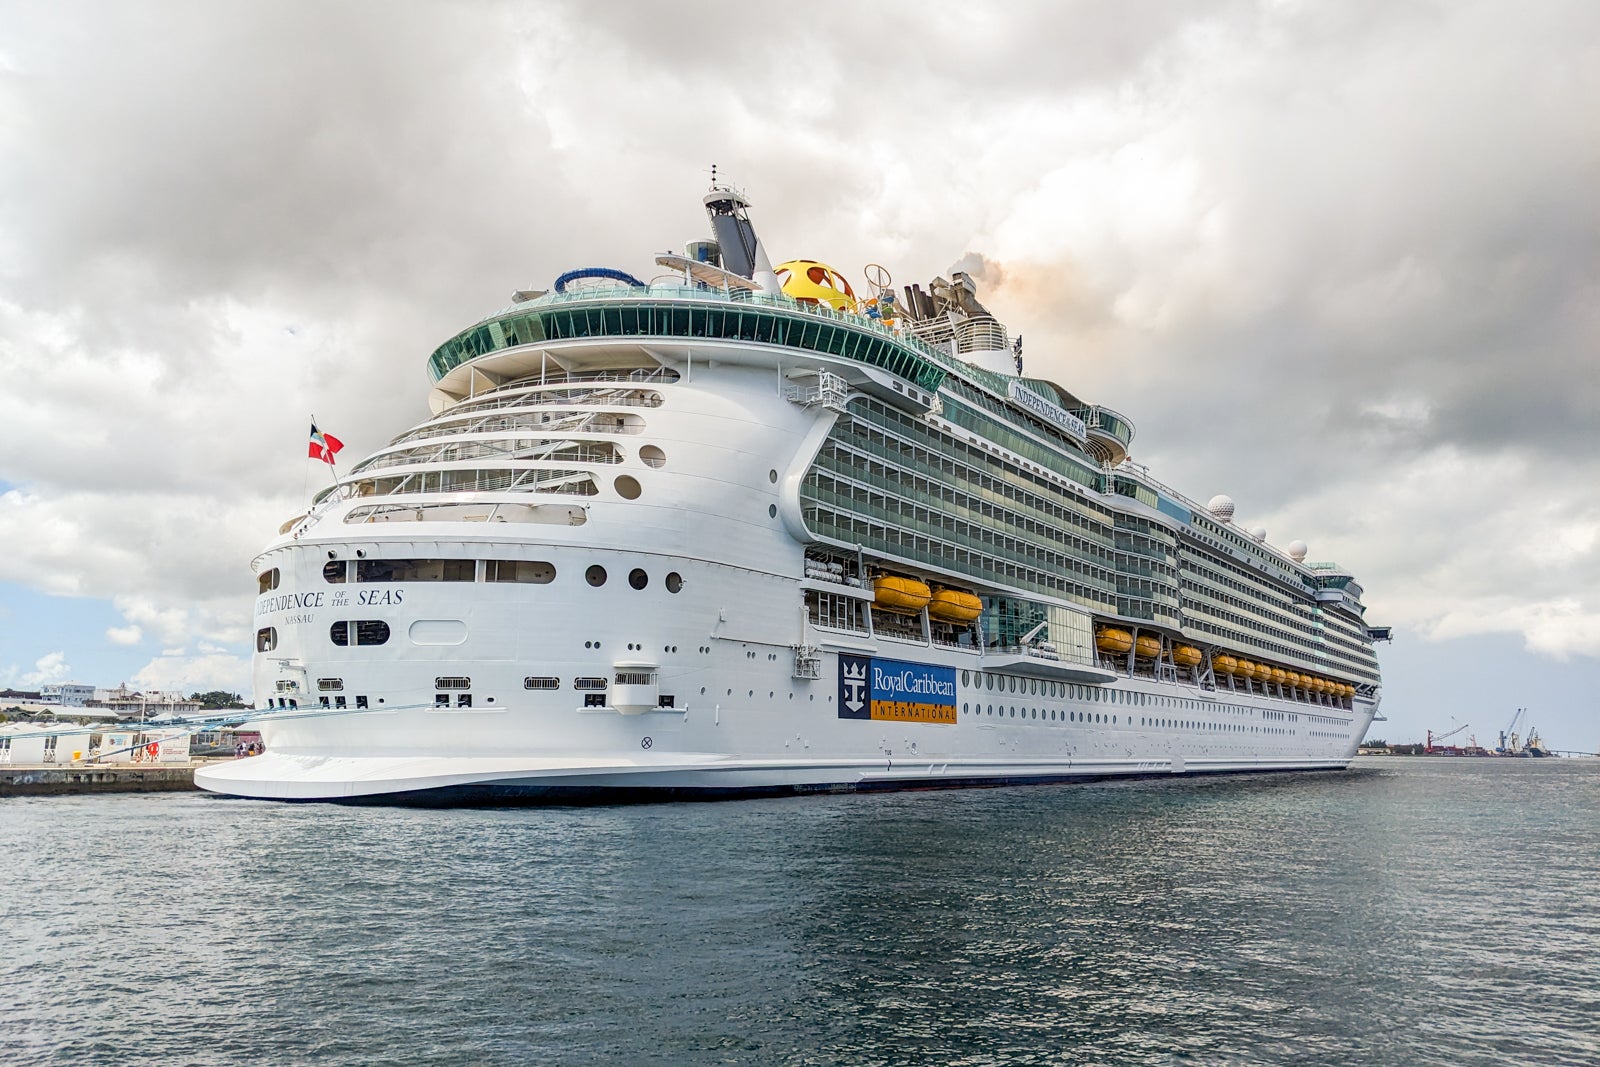 Independence of the Seas cruise ship review: What to expect on board a Freedom-class megaship